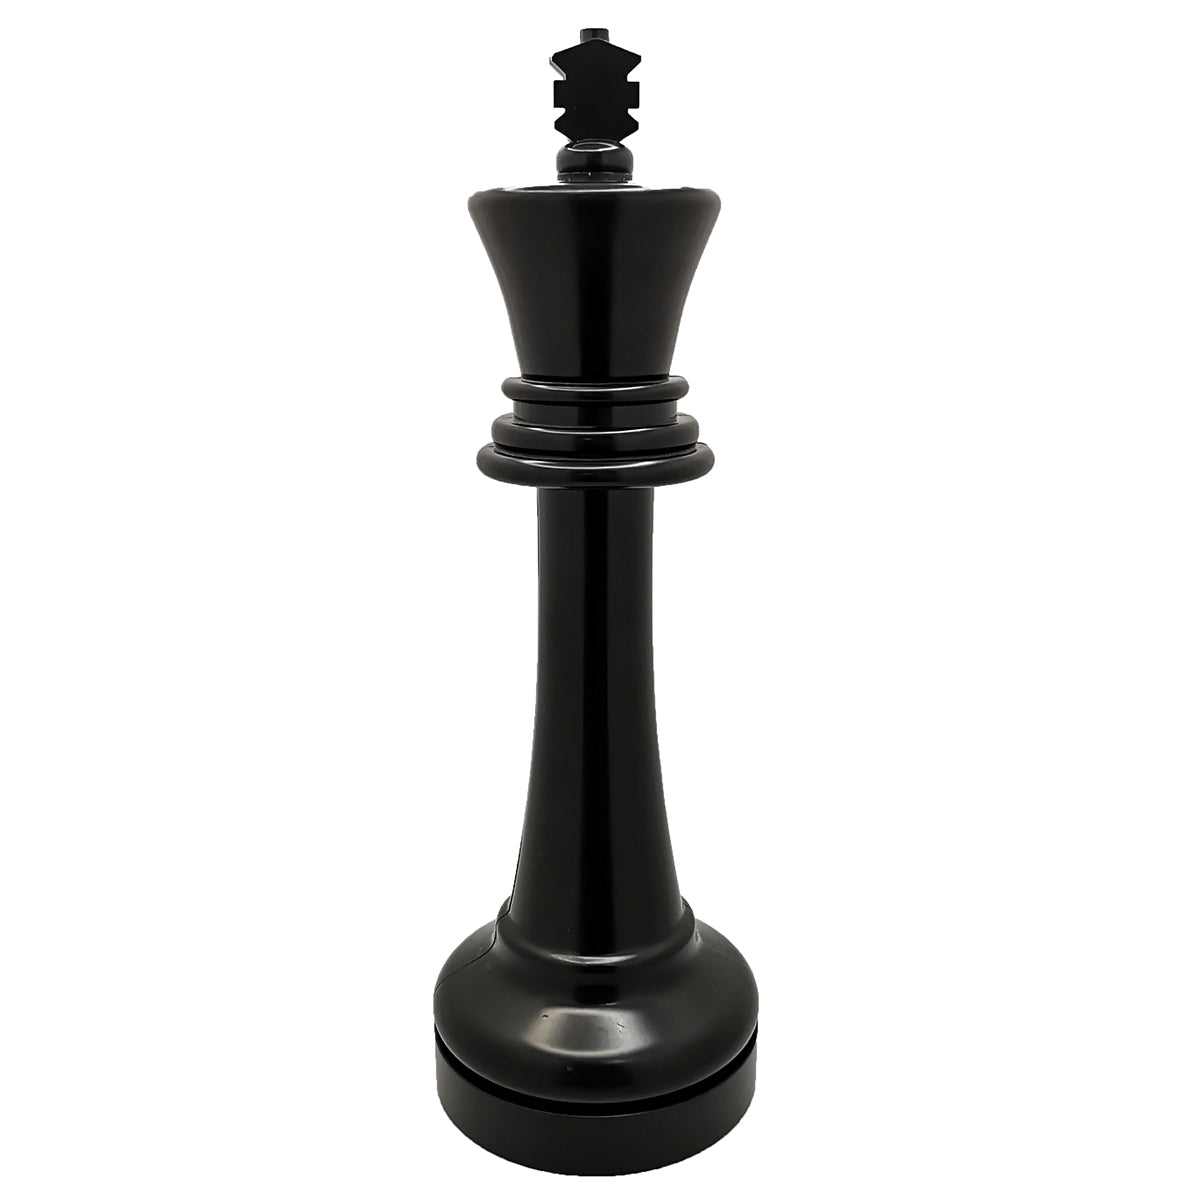 Giant Garden Chess 43cm Replacement Pieces Black King